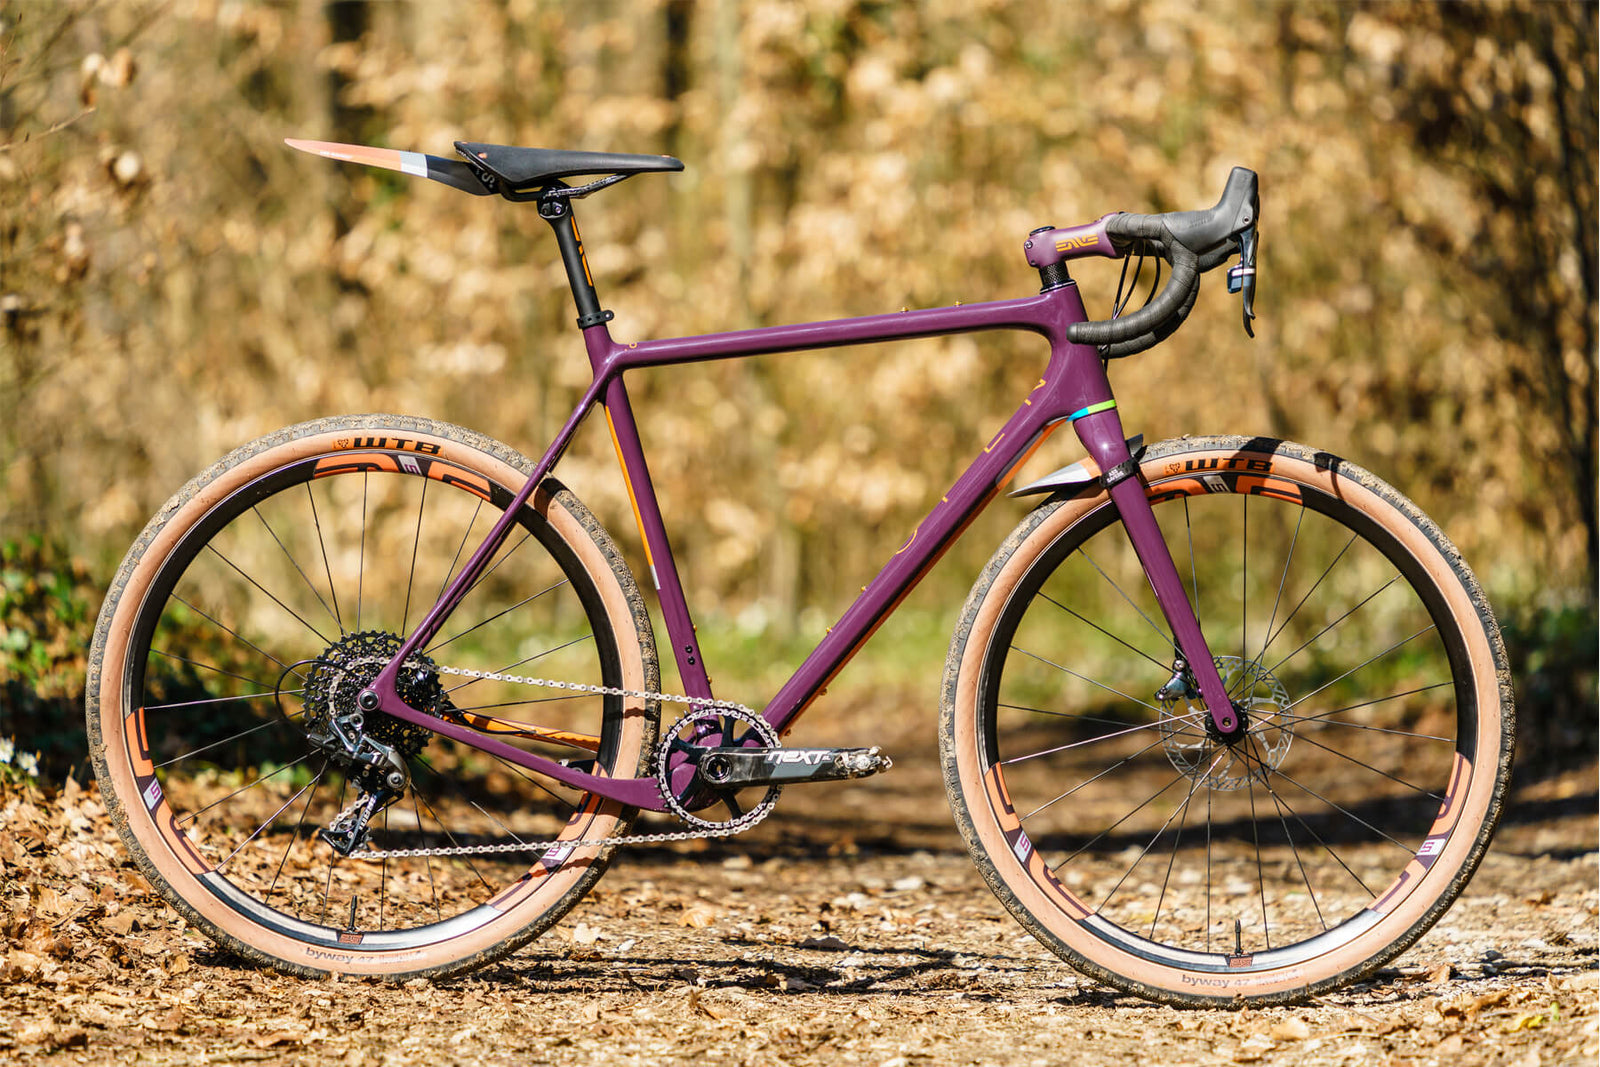 The OPEN U.P. ENVE Edition is Born to the Purple